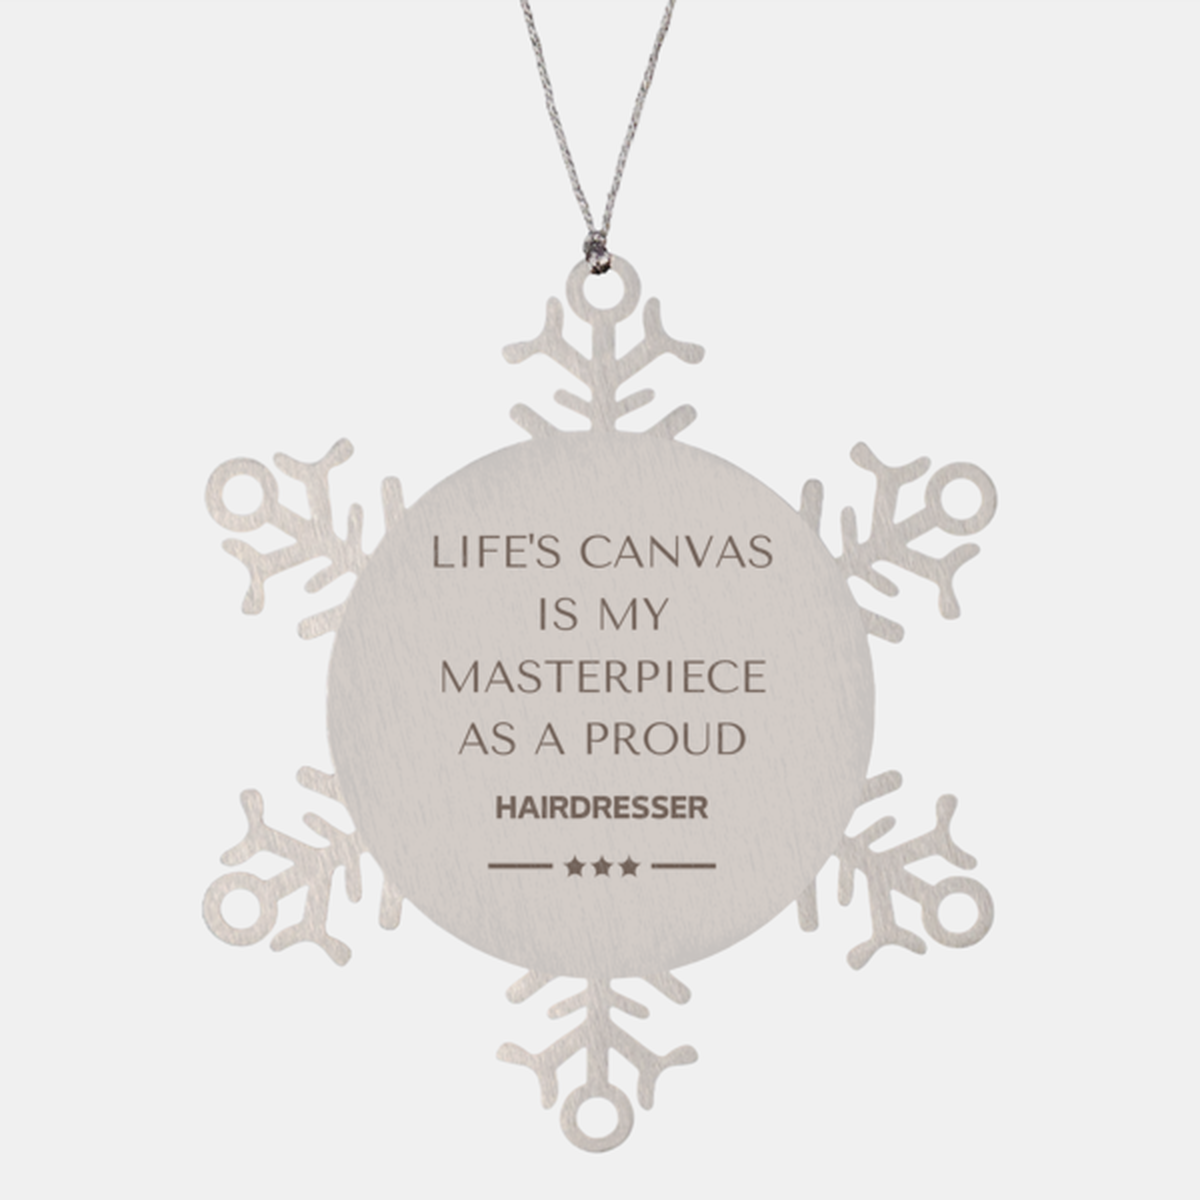 Proud Hairdresser Gifts, Life's canvas is my masterpiece, Epic Birthday Christmas Unique Snowflake Ornament For Hairdresser, Coworkers, Men, Women, Friends